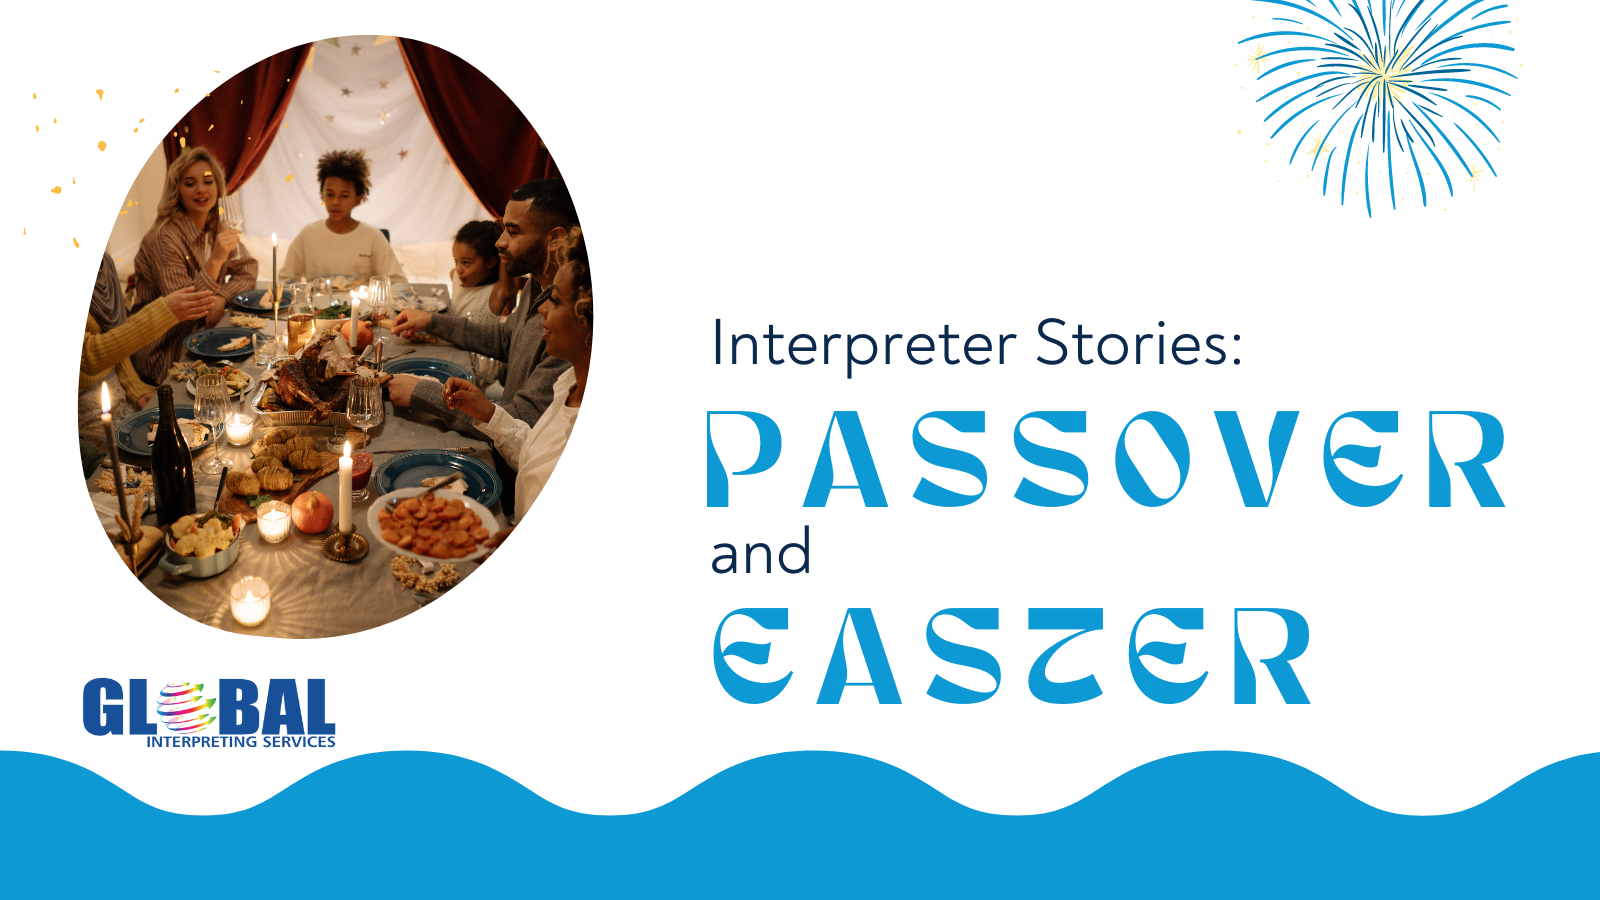 Graphic with interpreter stories: Passover & Easter